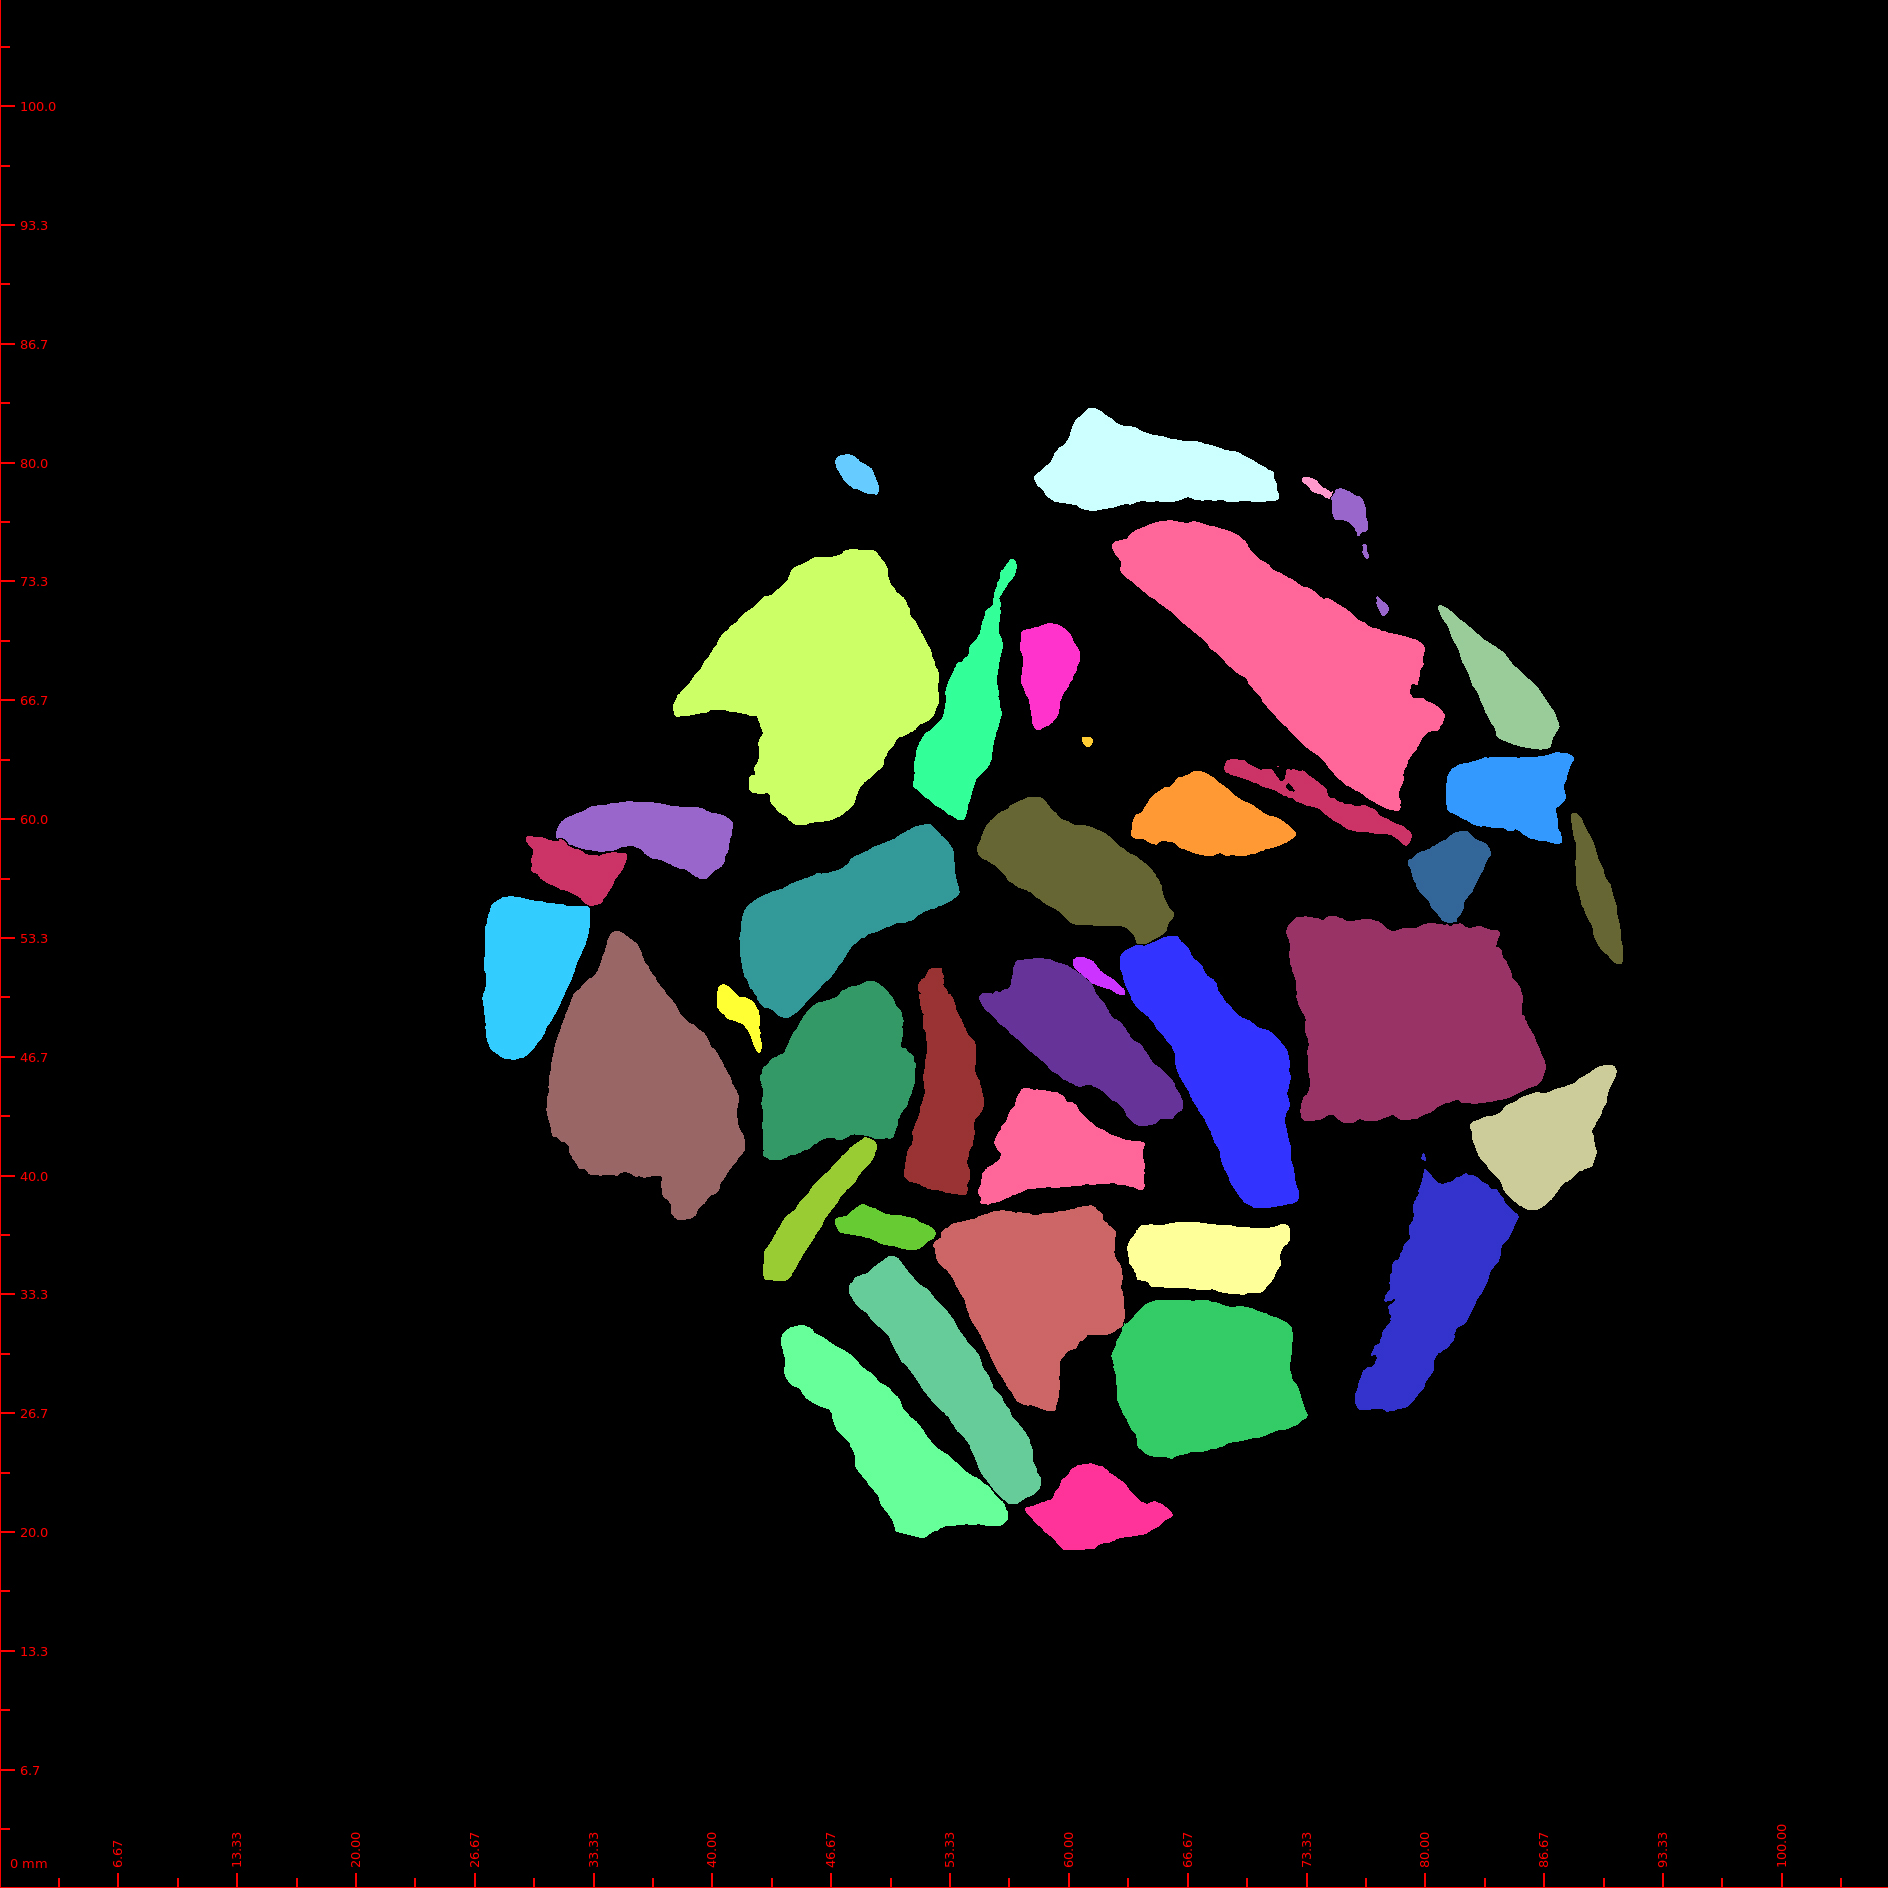 Same slice with separated particles. Colors indicate the image object labels.